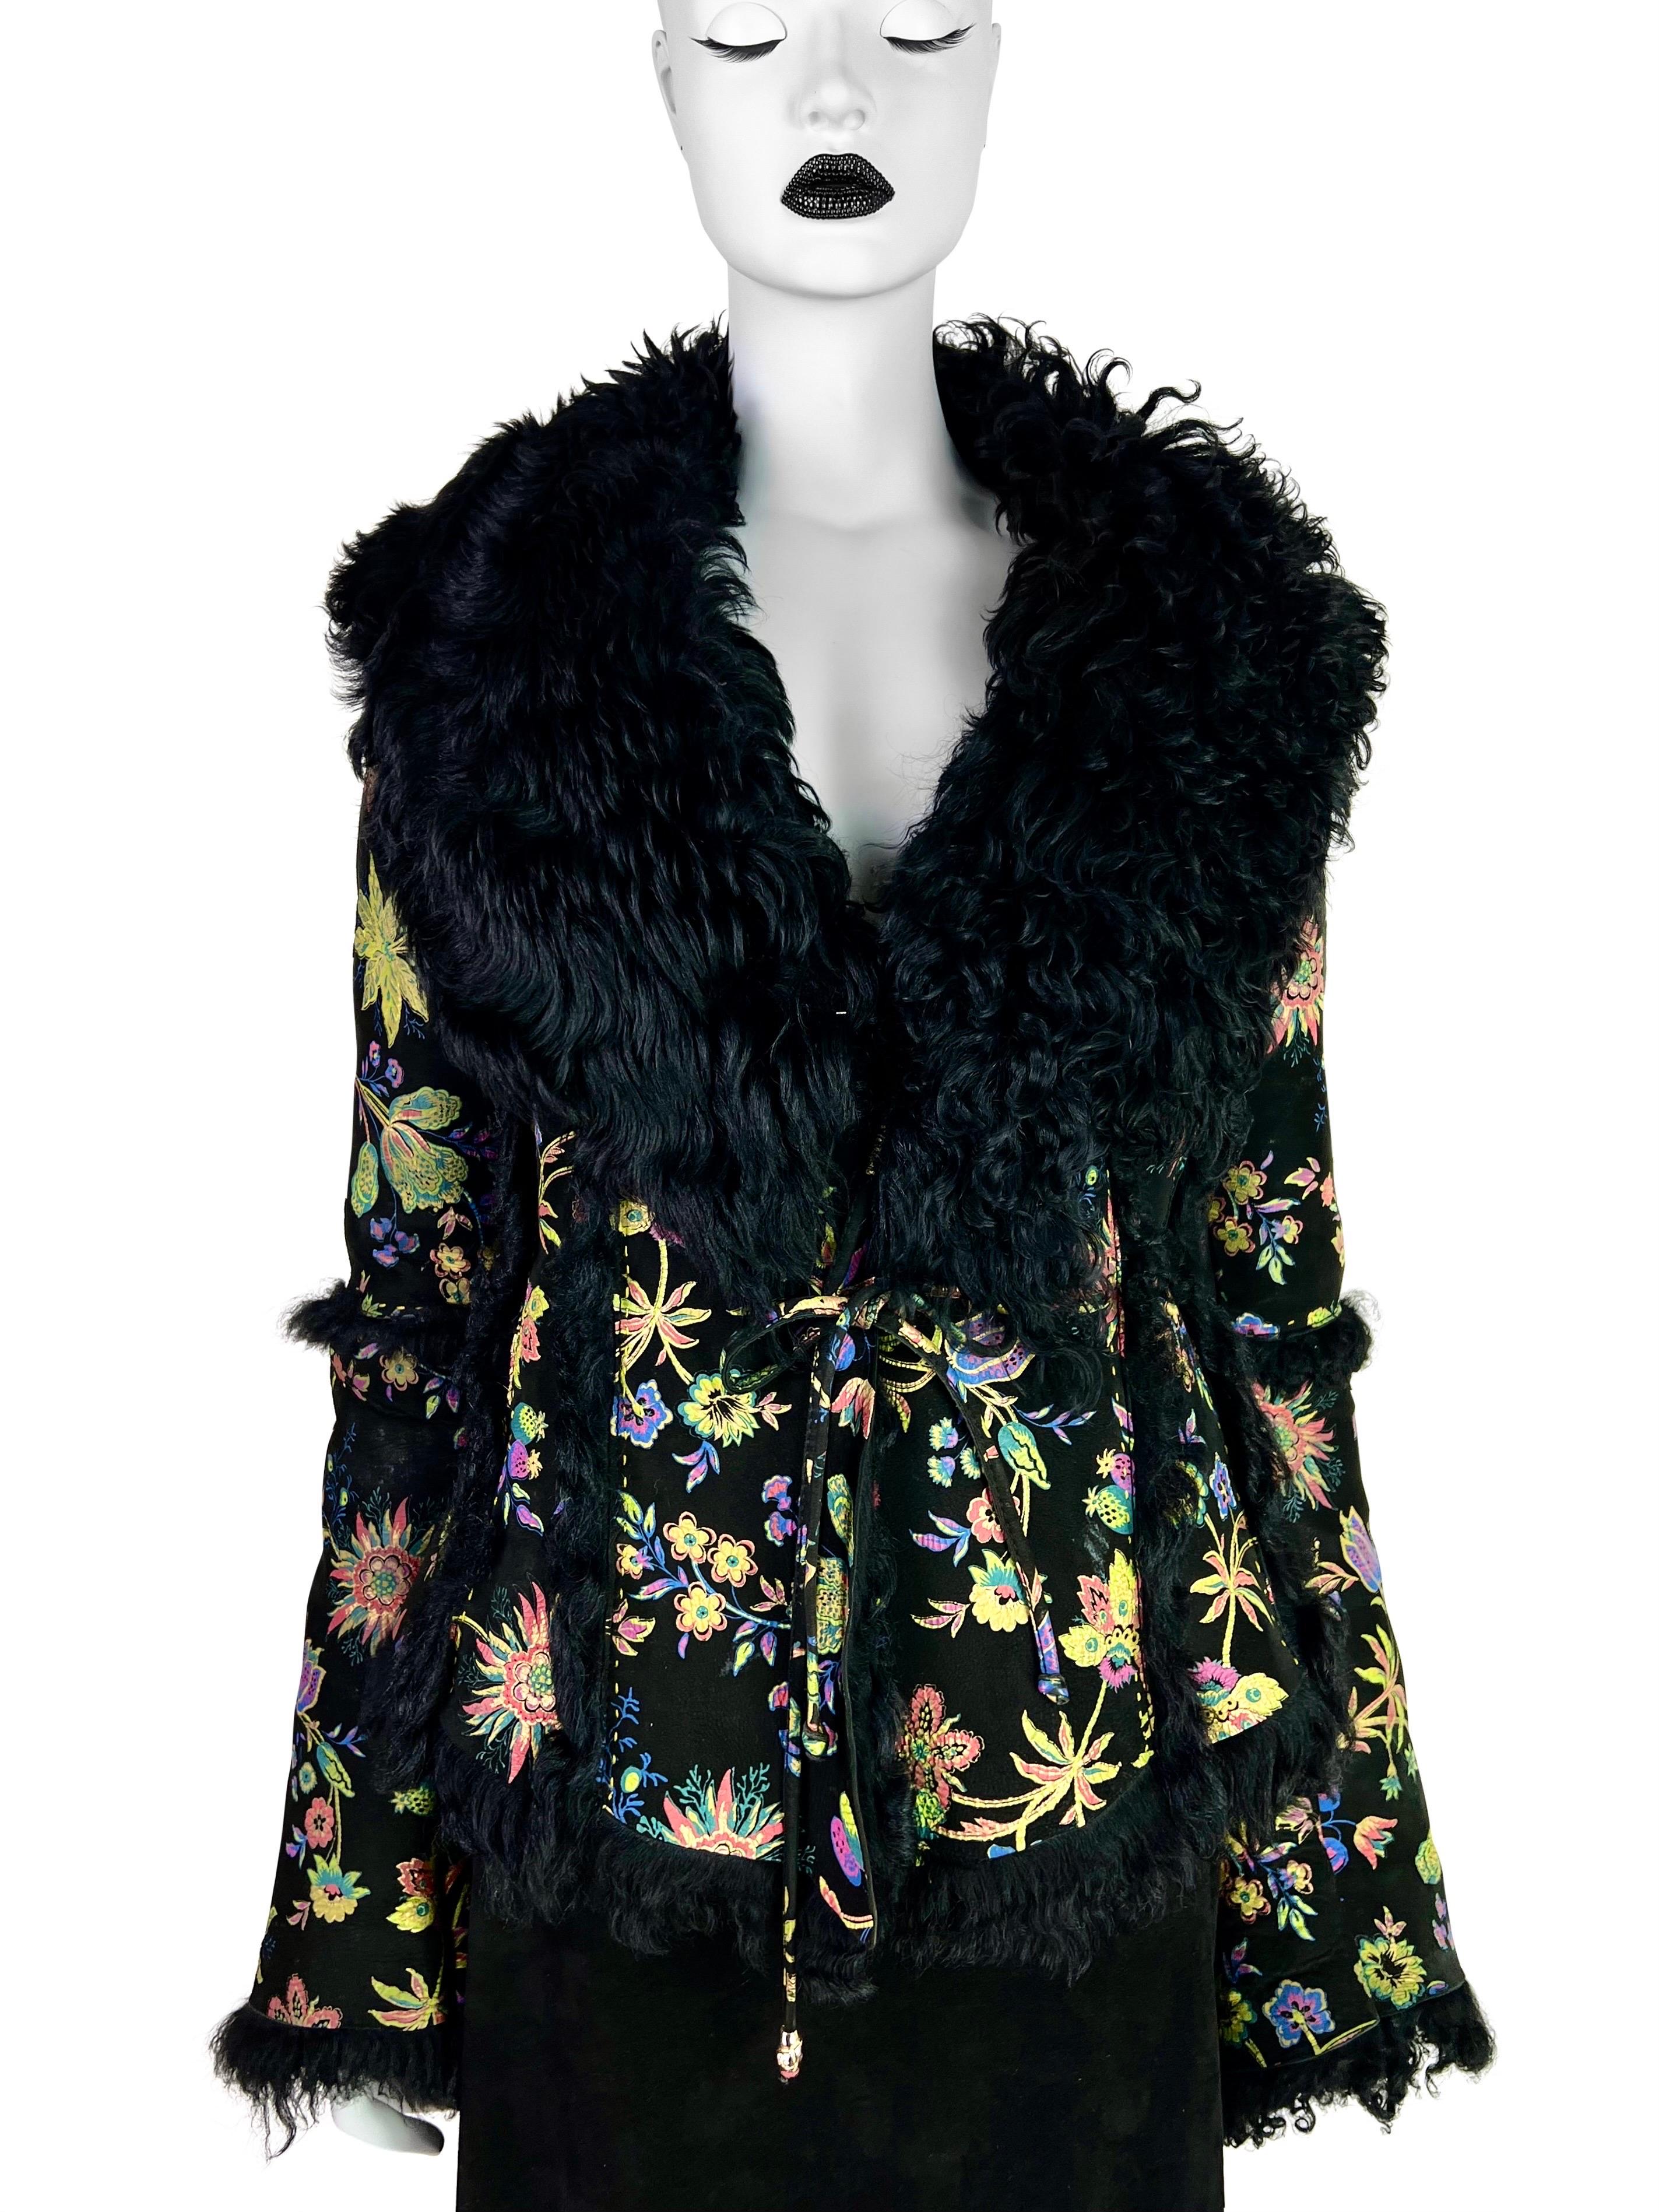 Roberto Cavalli Fall 1999 Hand-painted Flower Shearling Jacket In Good Condition For Sale In Prague, CZ